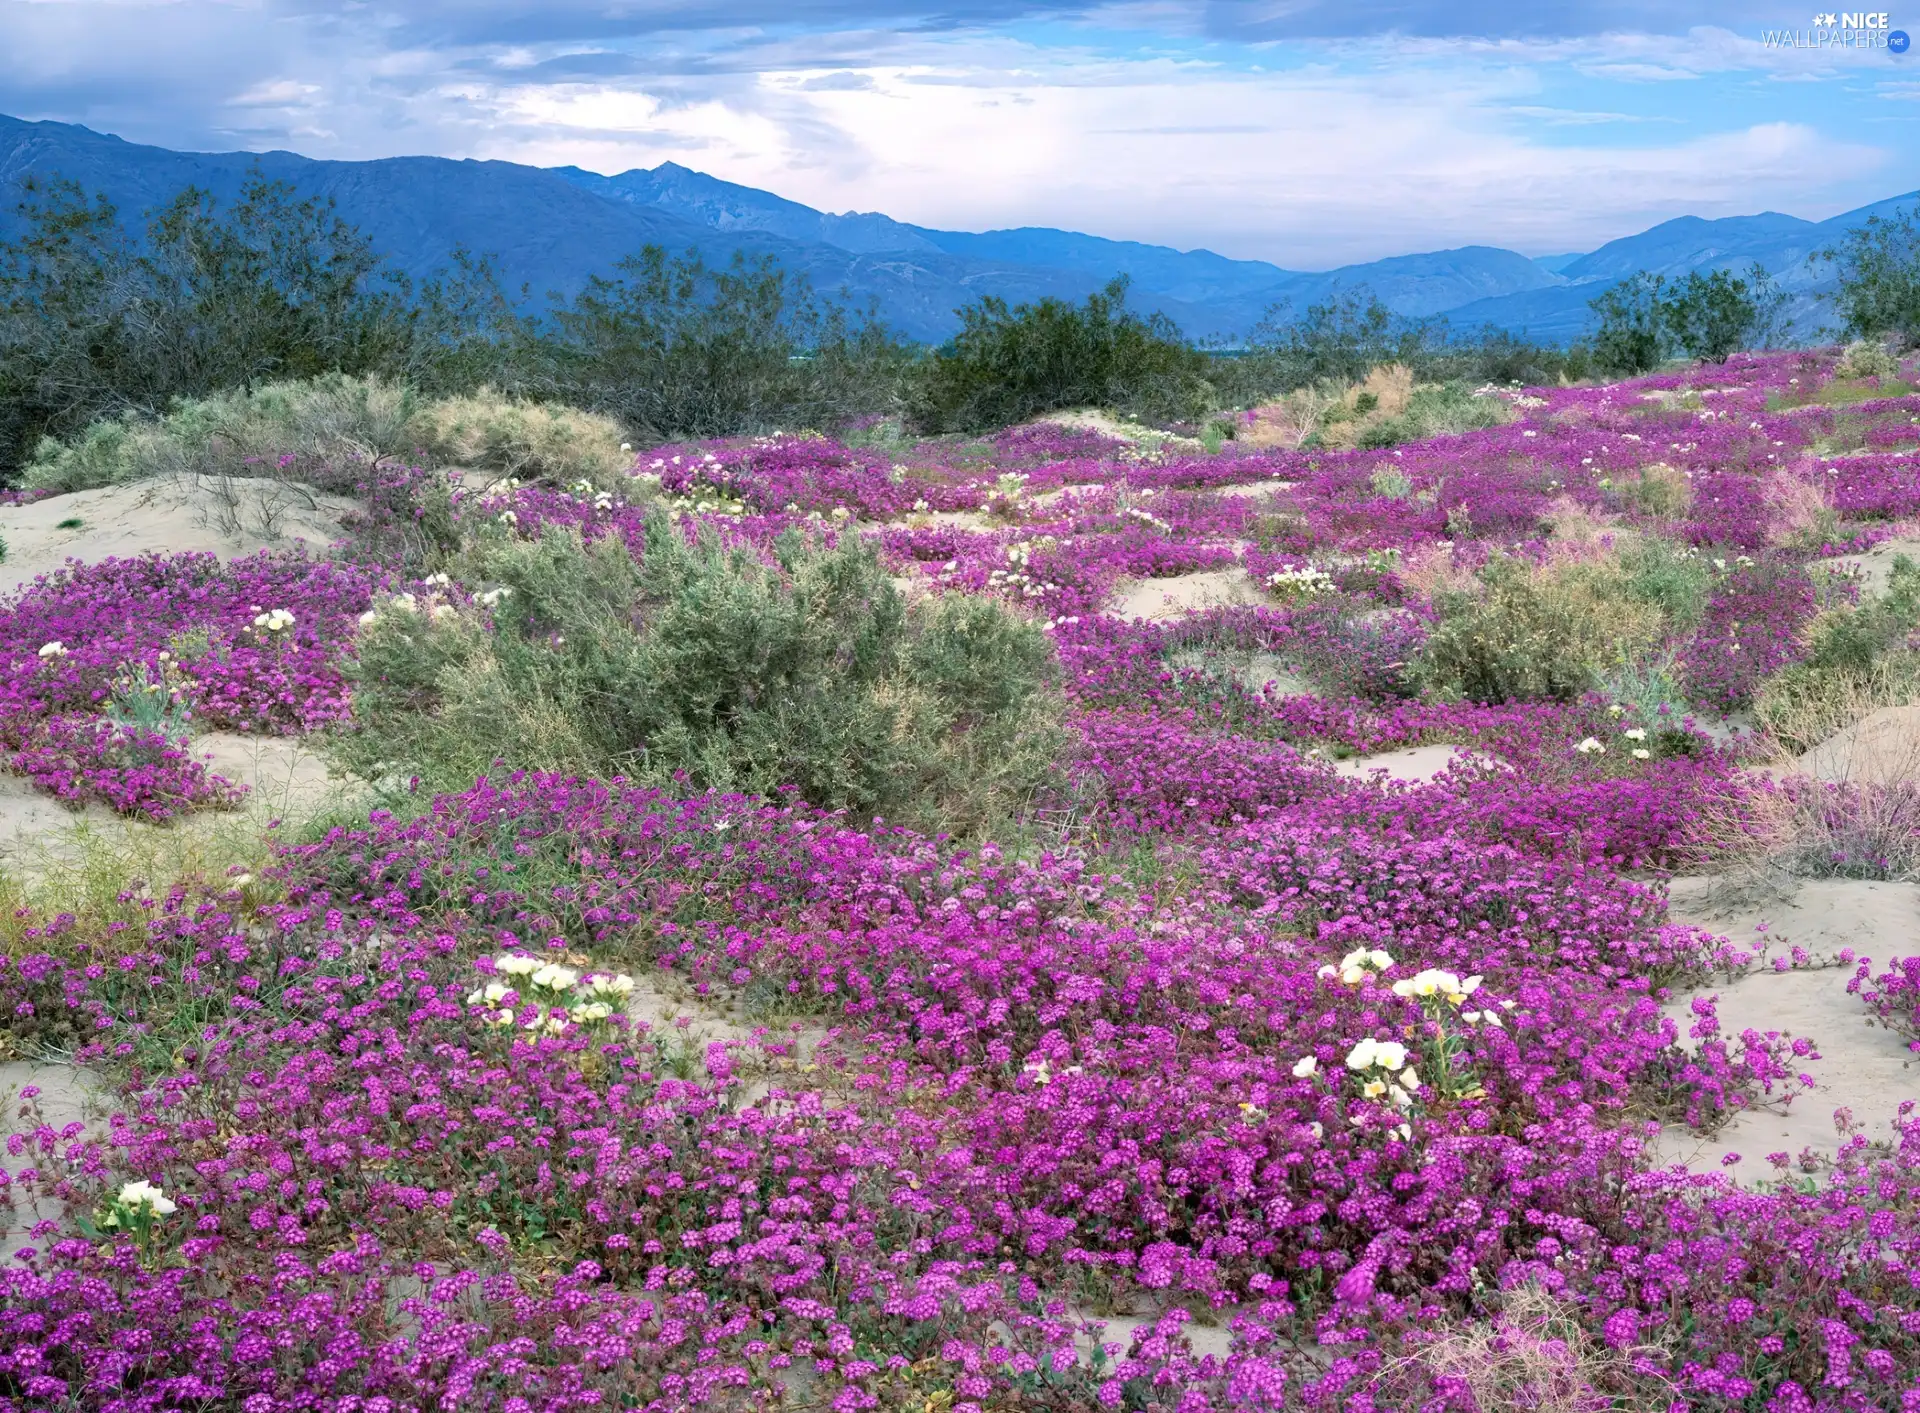 trees, Wildflowers, Mountains, Sky, viewes, Flowers